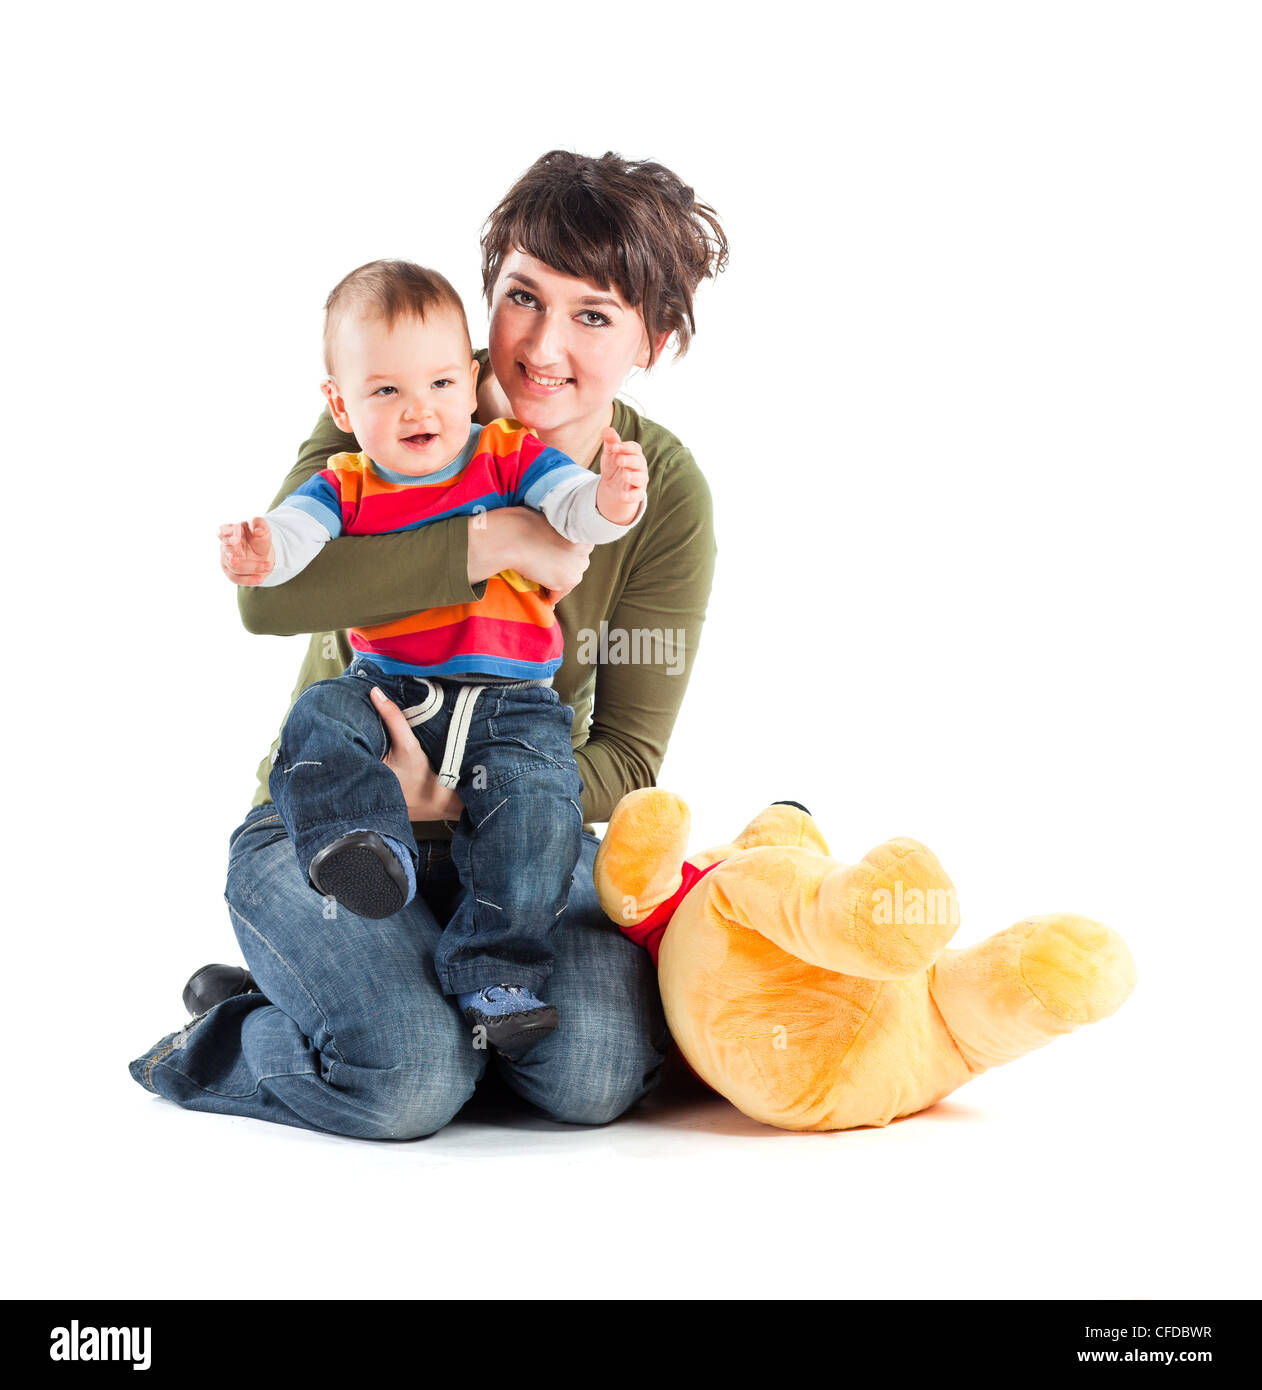 Little baby with mother. Studio shot. Stock Photo